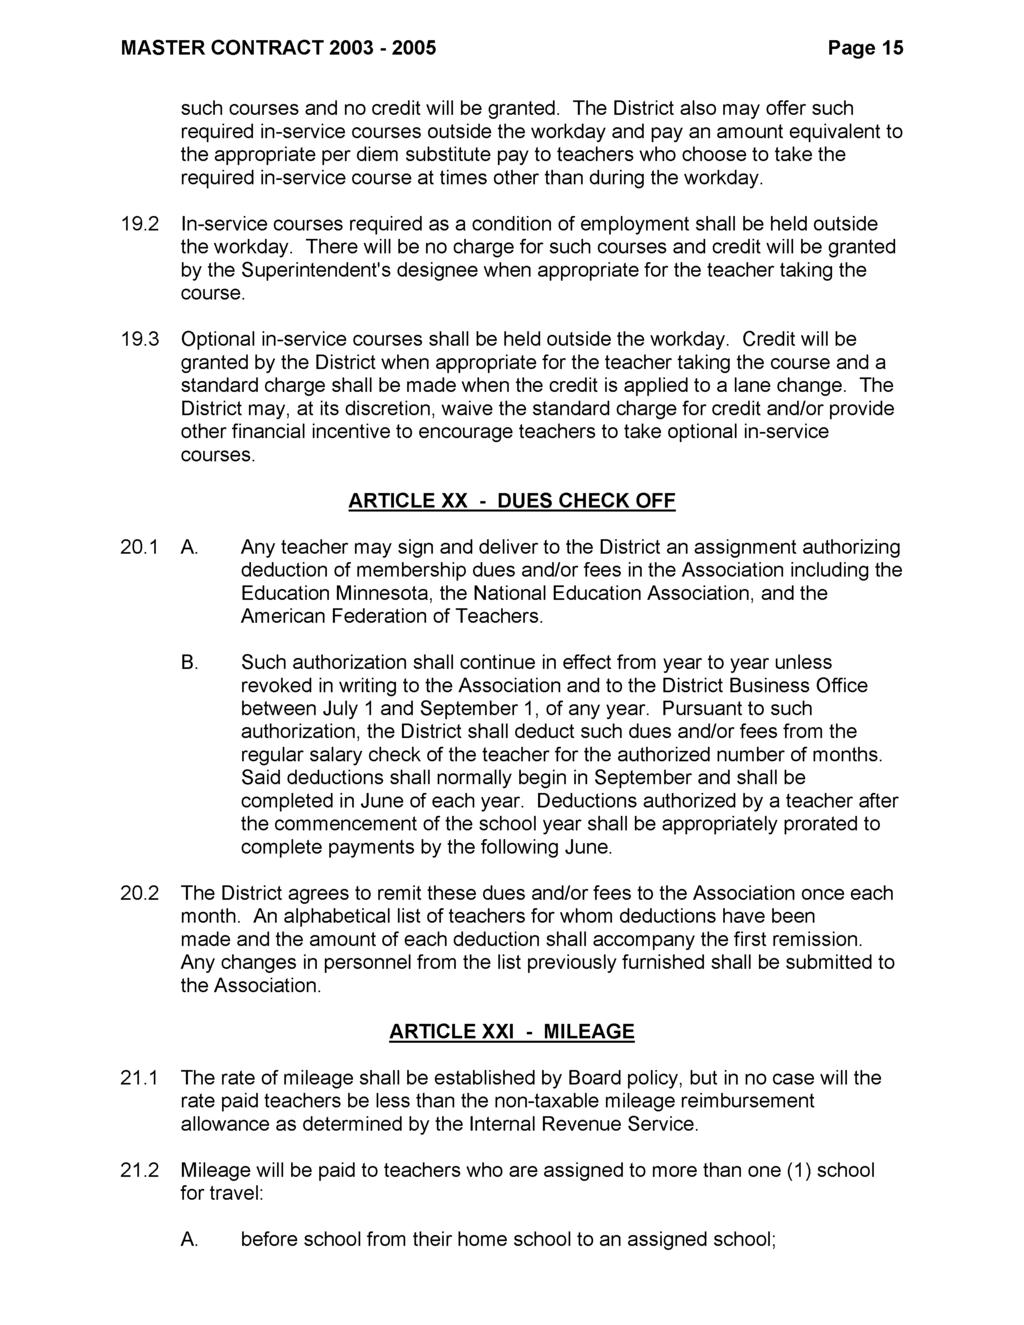 MASTER CONTRACT 2003-2005 Page 15 such courses and no credit will be granted.